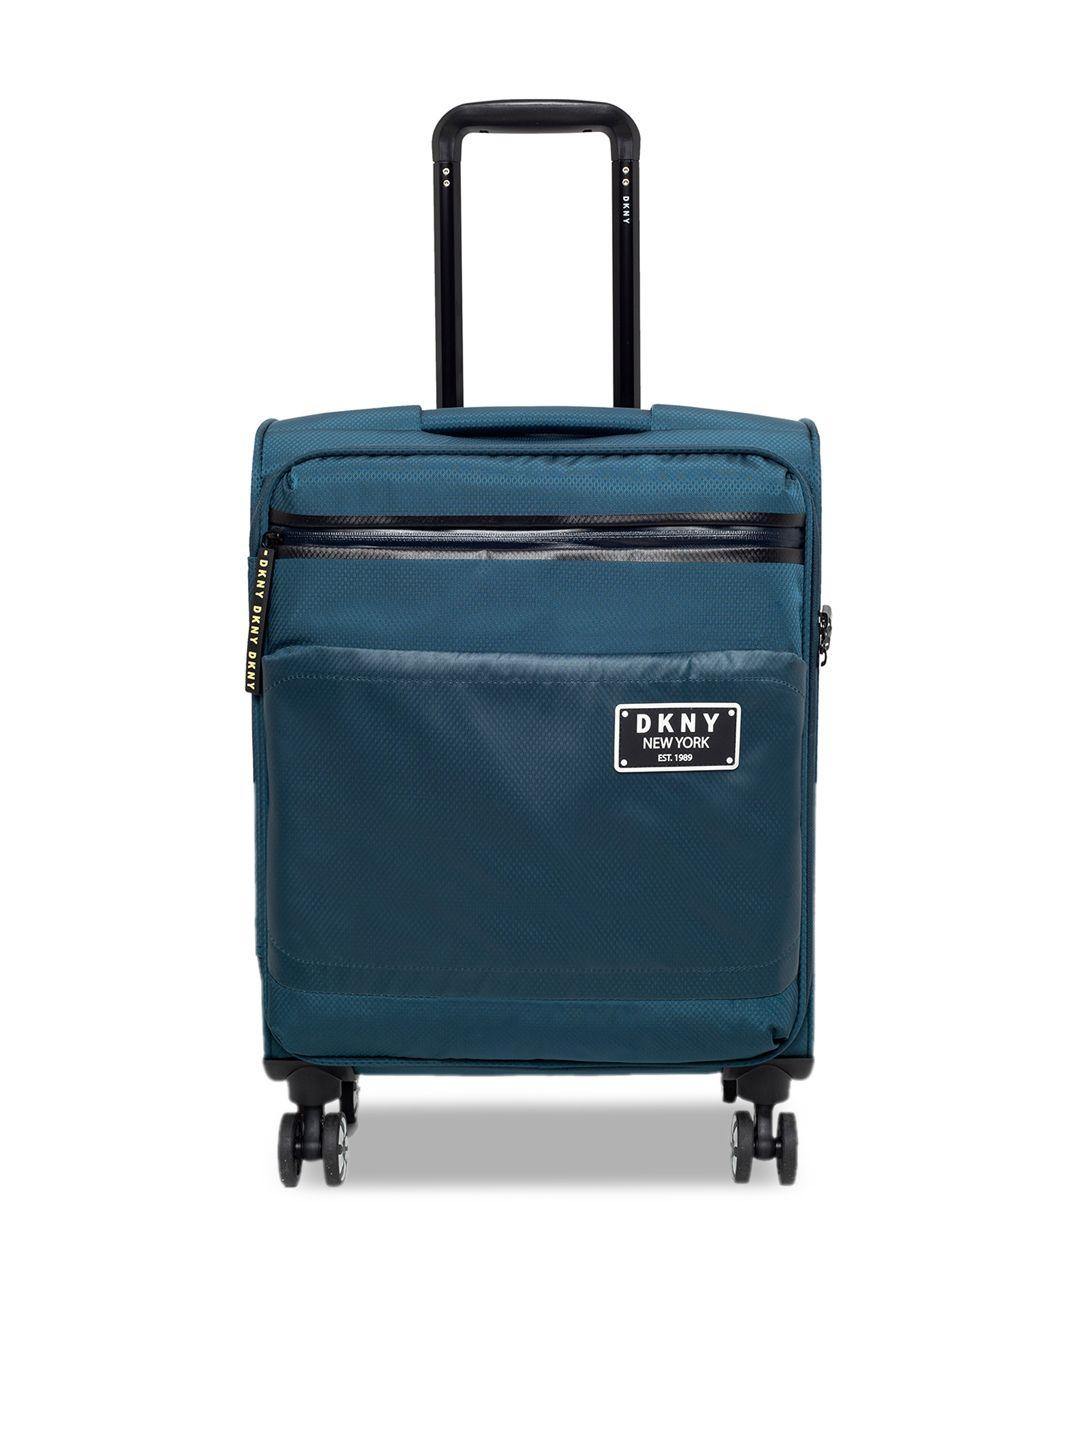 Unisex Teal Blue Solid GLOBE TROTTER Soft-Sided Cabin Trolley Suitcase